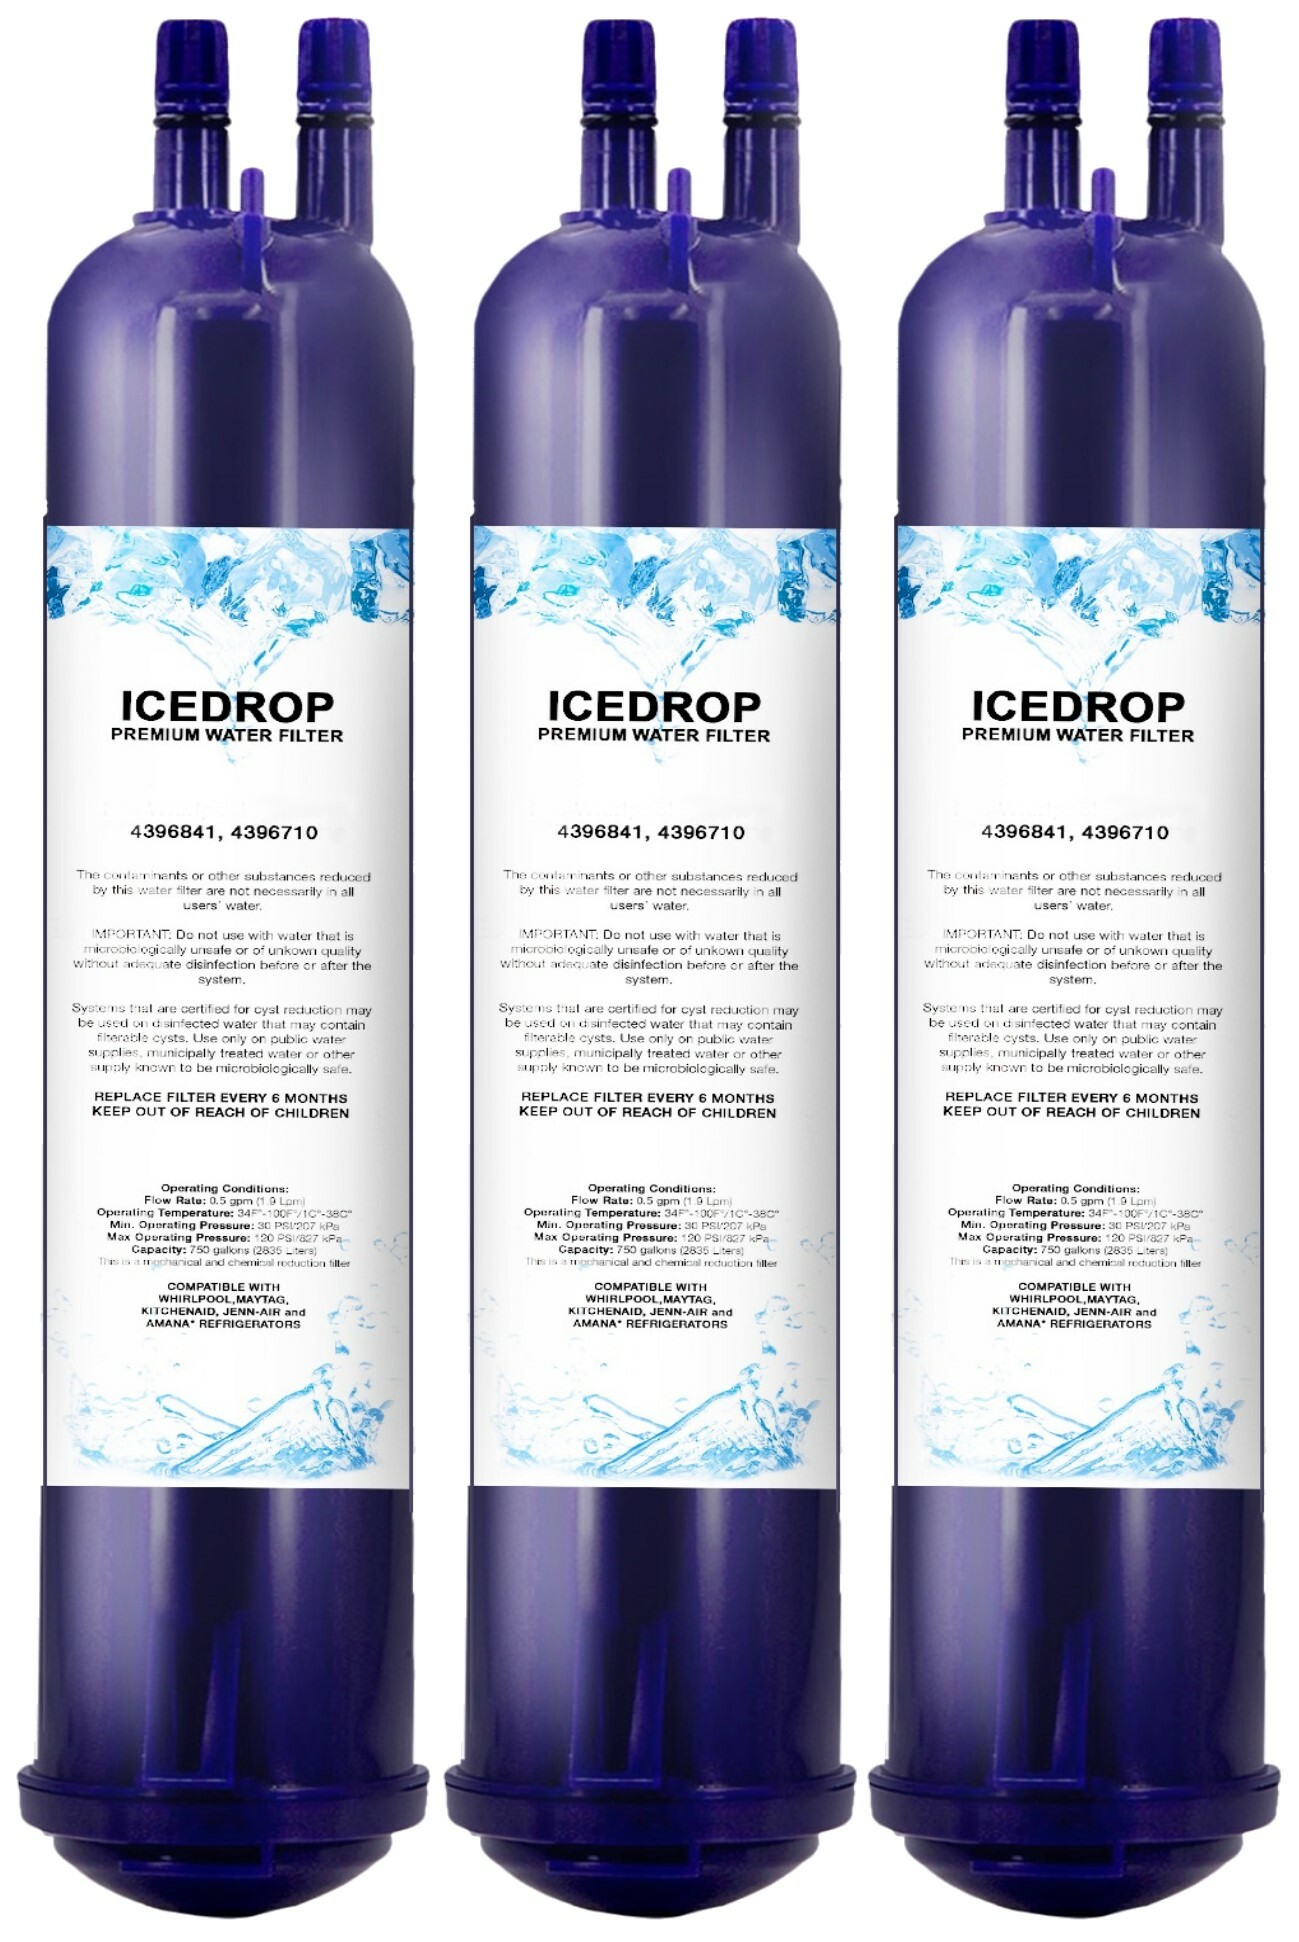 Ice Drop Refrigerator Water Filter Compatible with 9083, 09083, 469083, 469020, 9020, 9020B, 9030, 9030B, 469030, WF710, T1KB1, 3 Pack